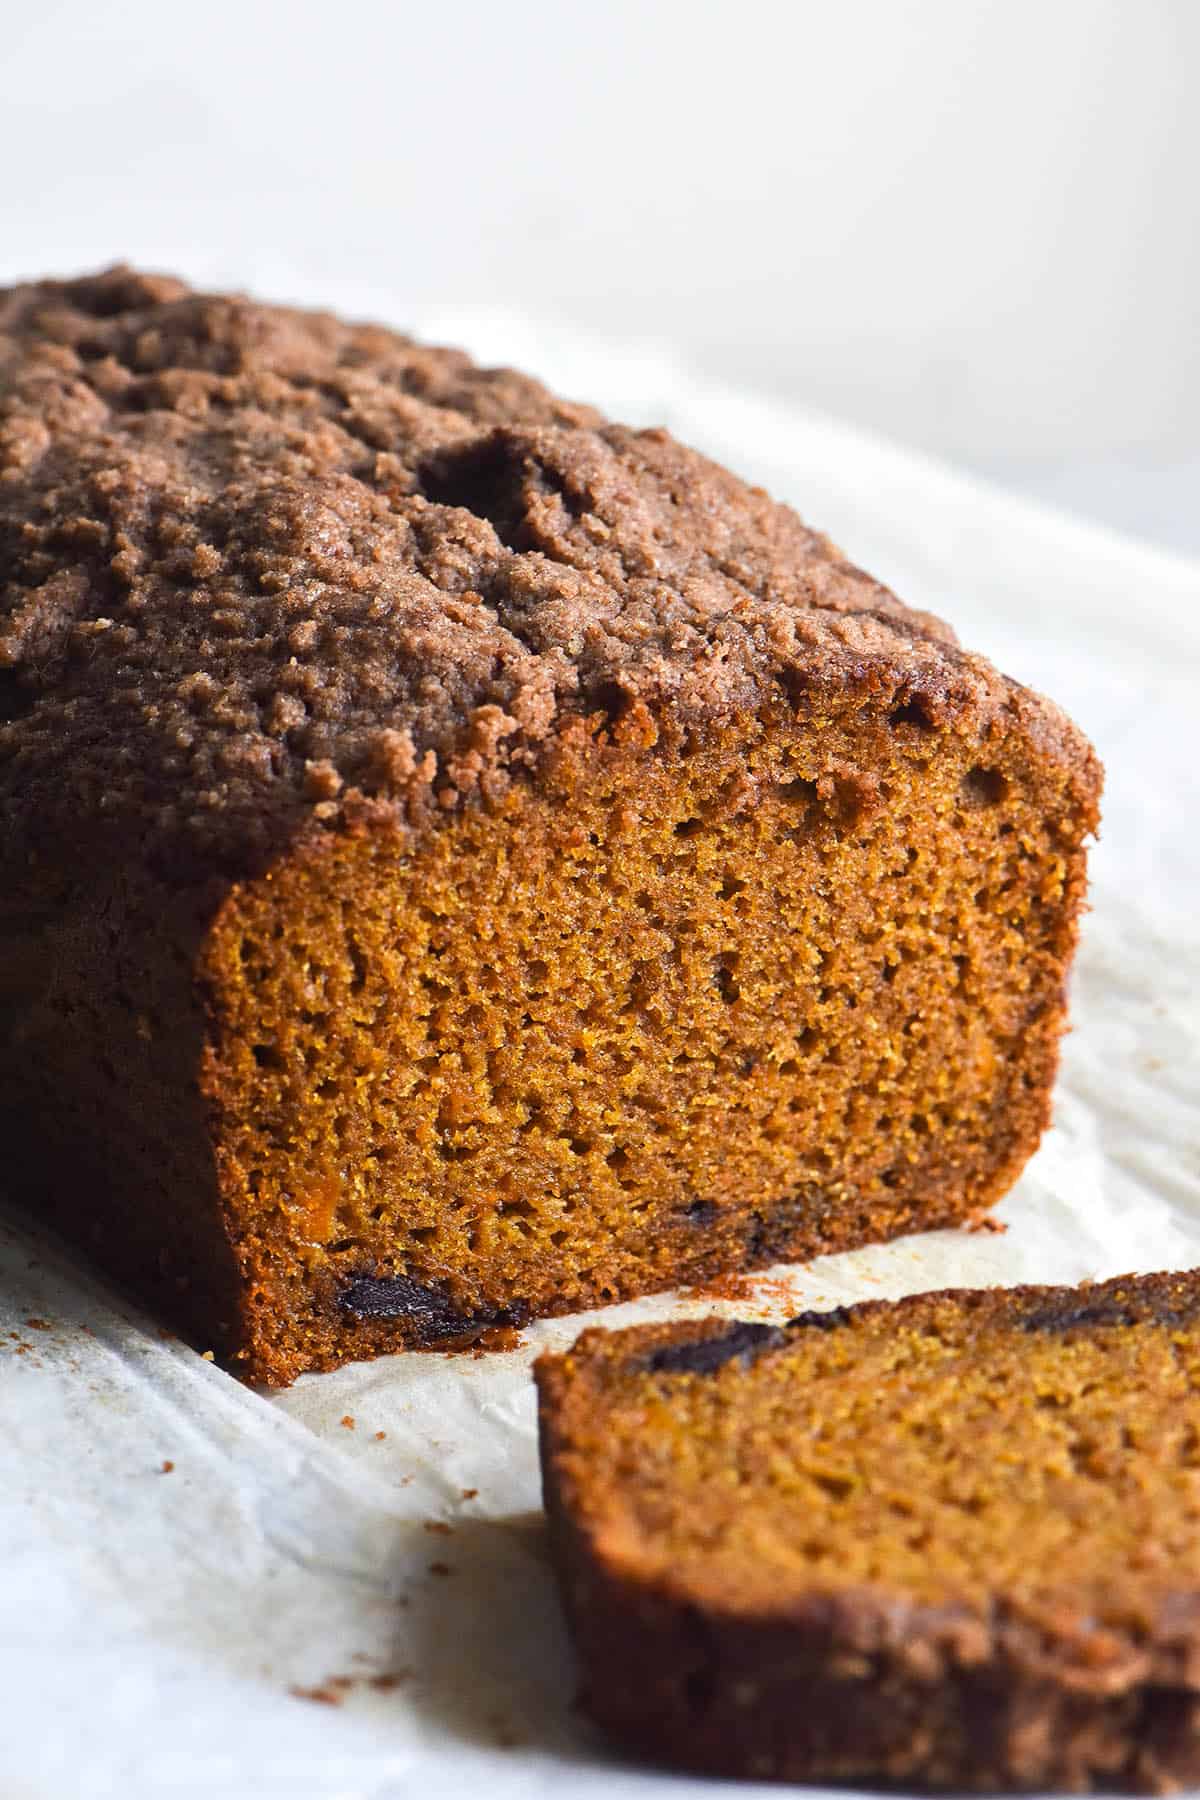 A side on, airy light photo of a loaf of gluten free pumpkin bread with a crumble topping. The loaf has a slice removed, revealing the bright orange crumb and a few studs of dark chocolate.